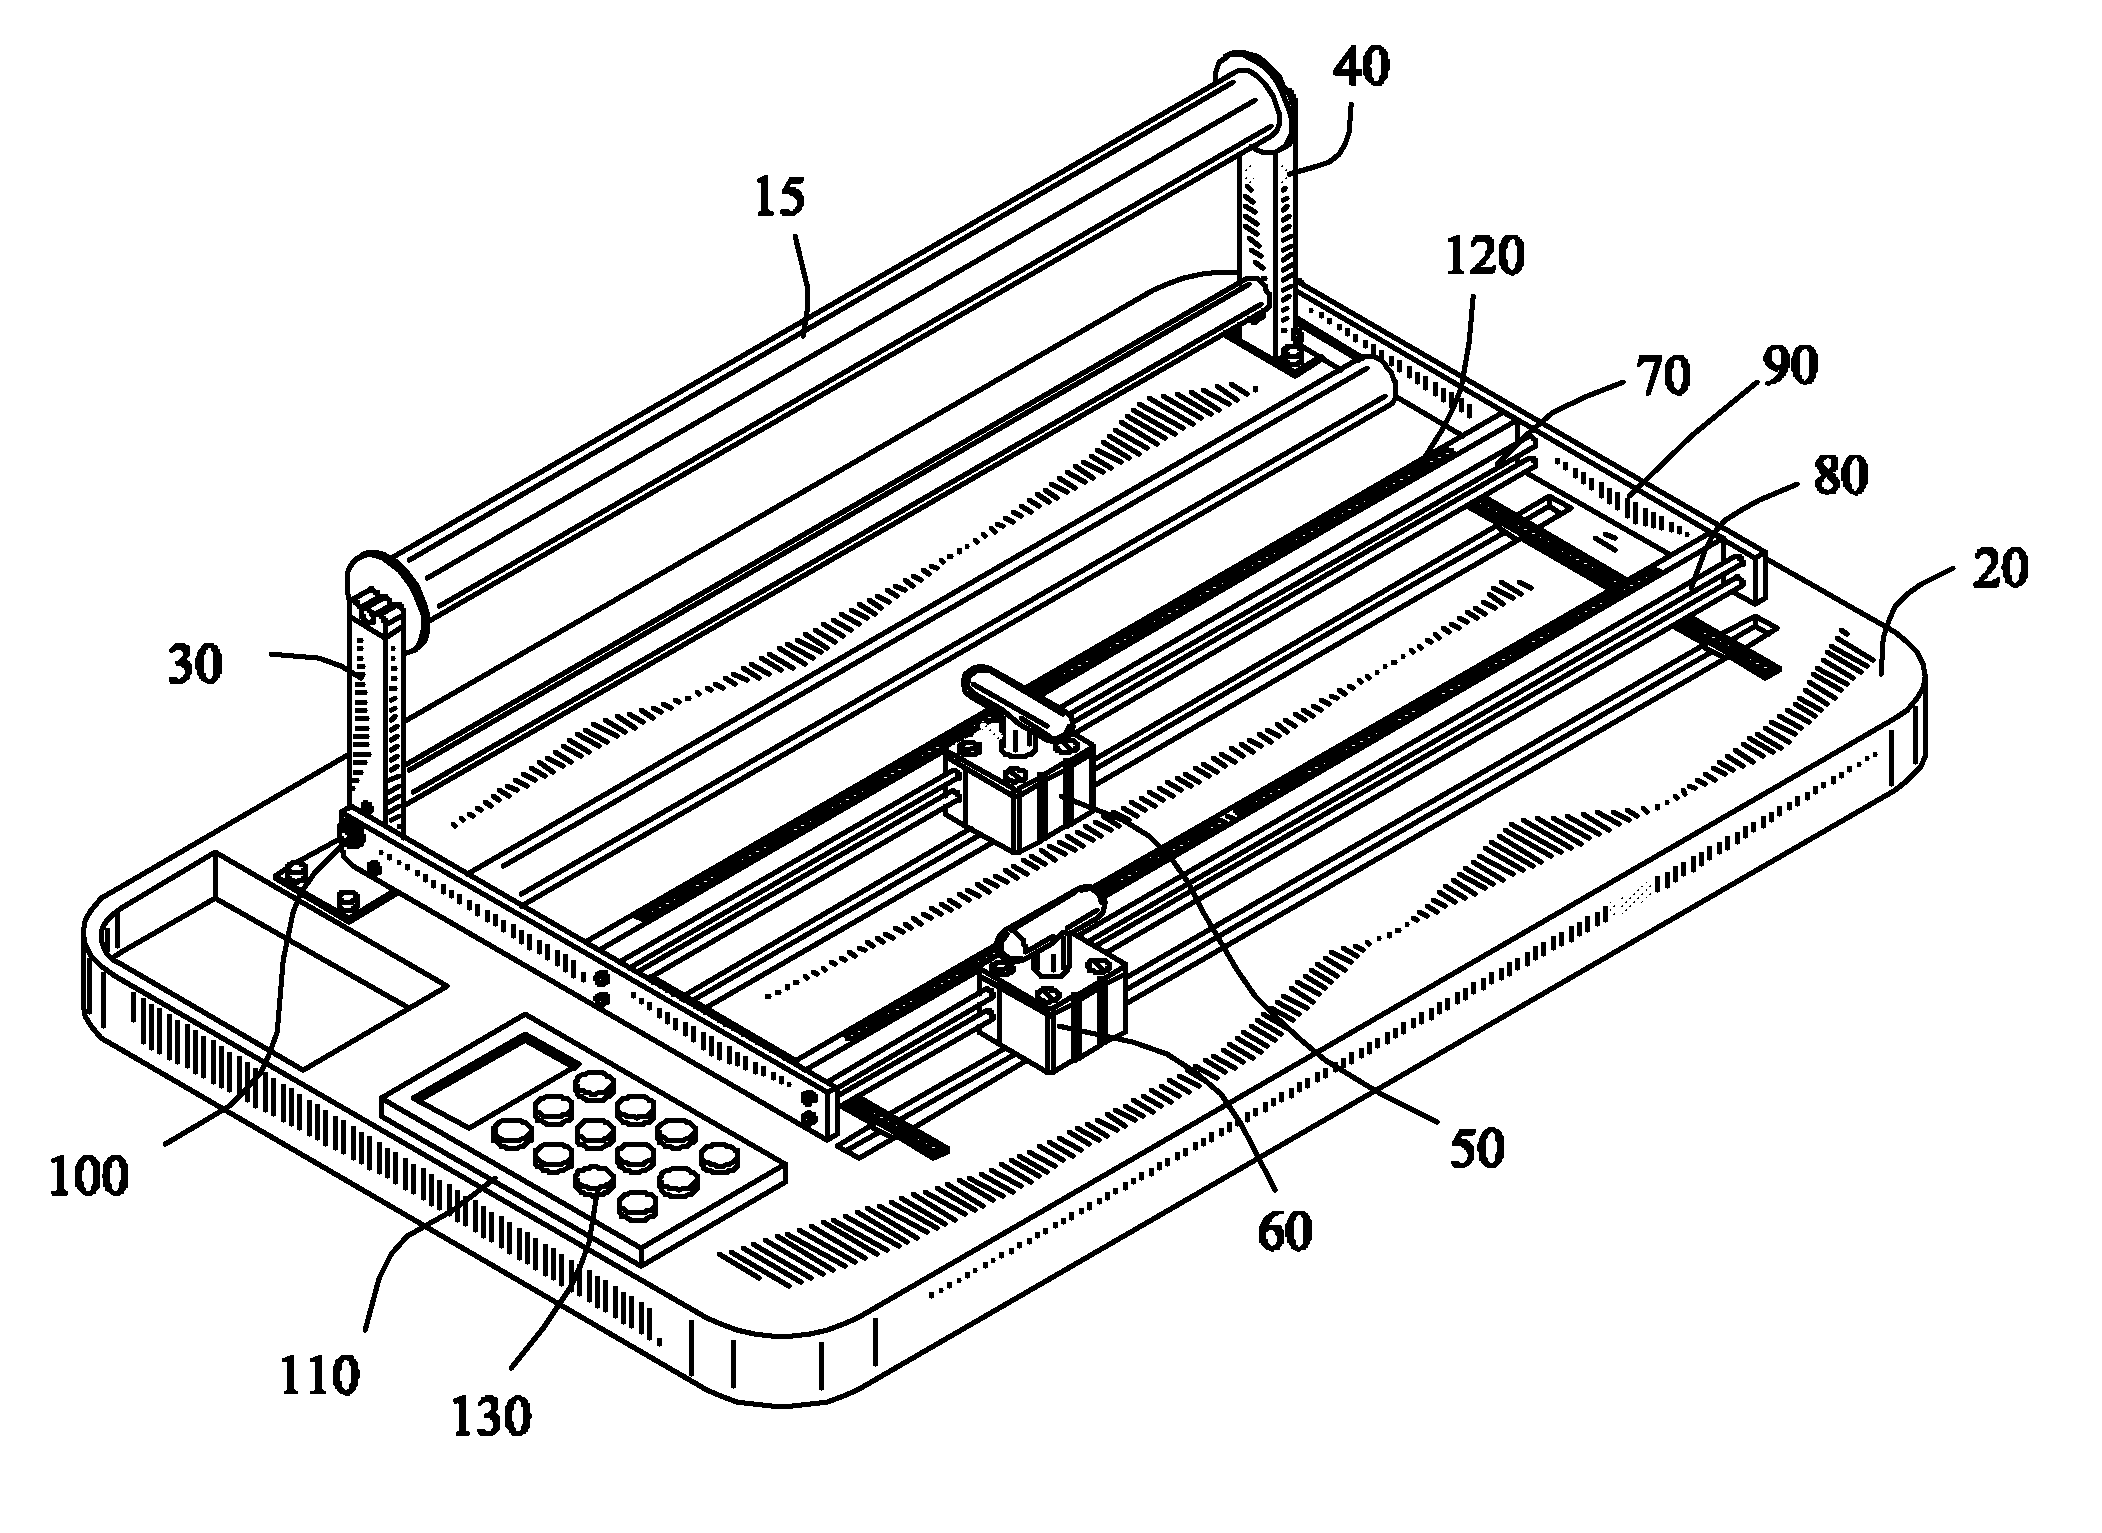 Rolled media cutting device